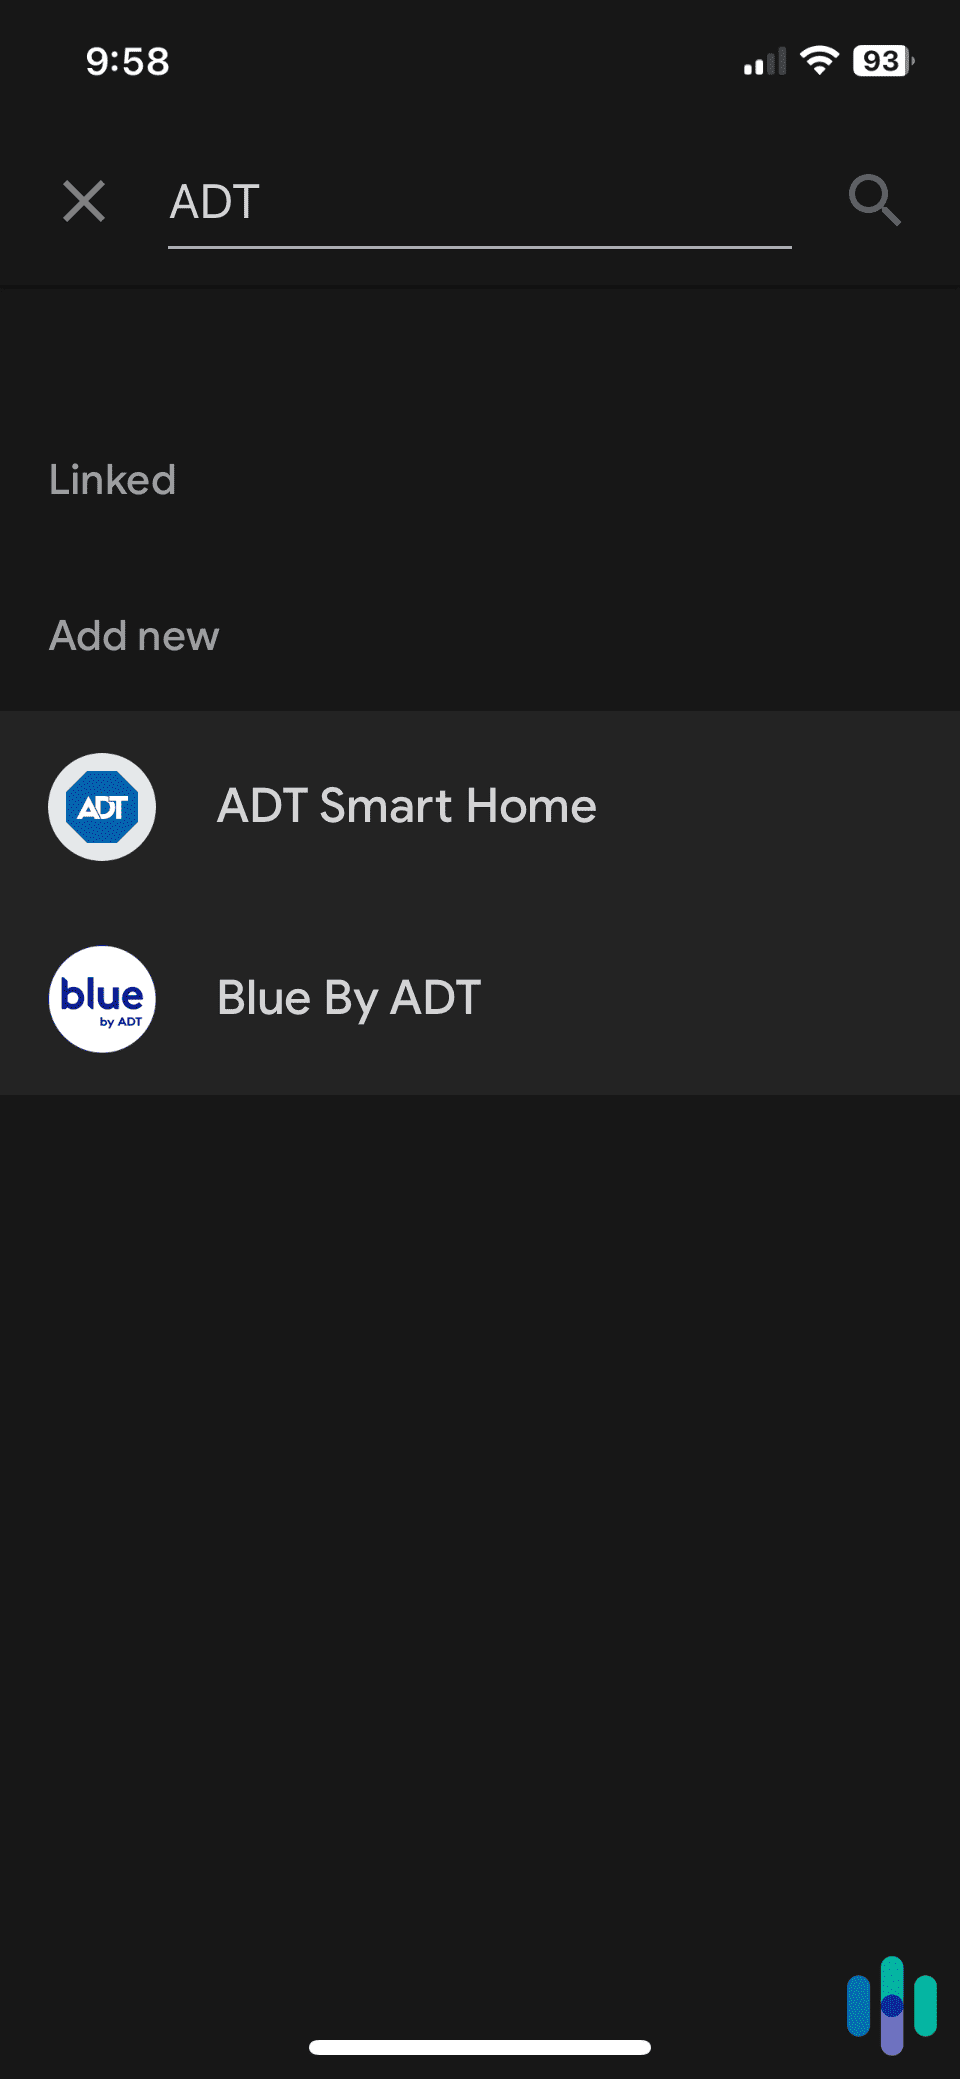 Adding ADT Smart Home to the Google Home app